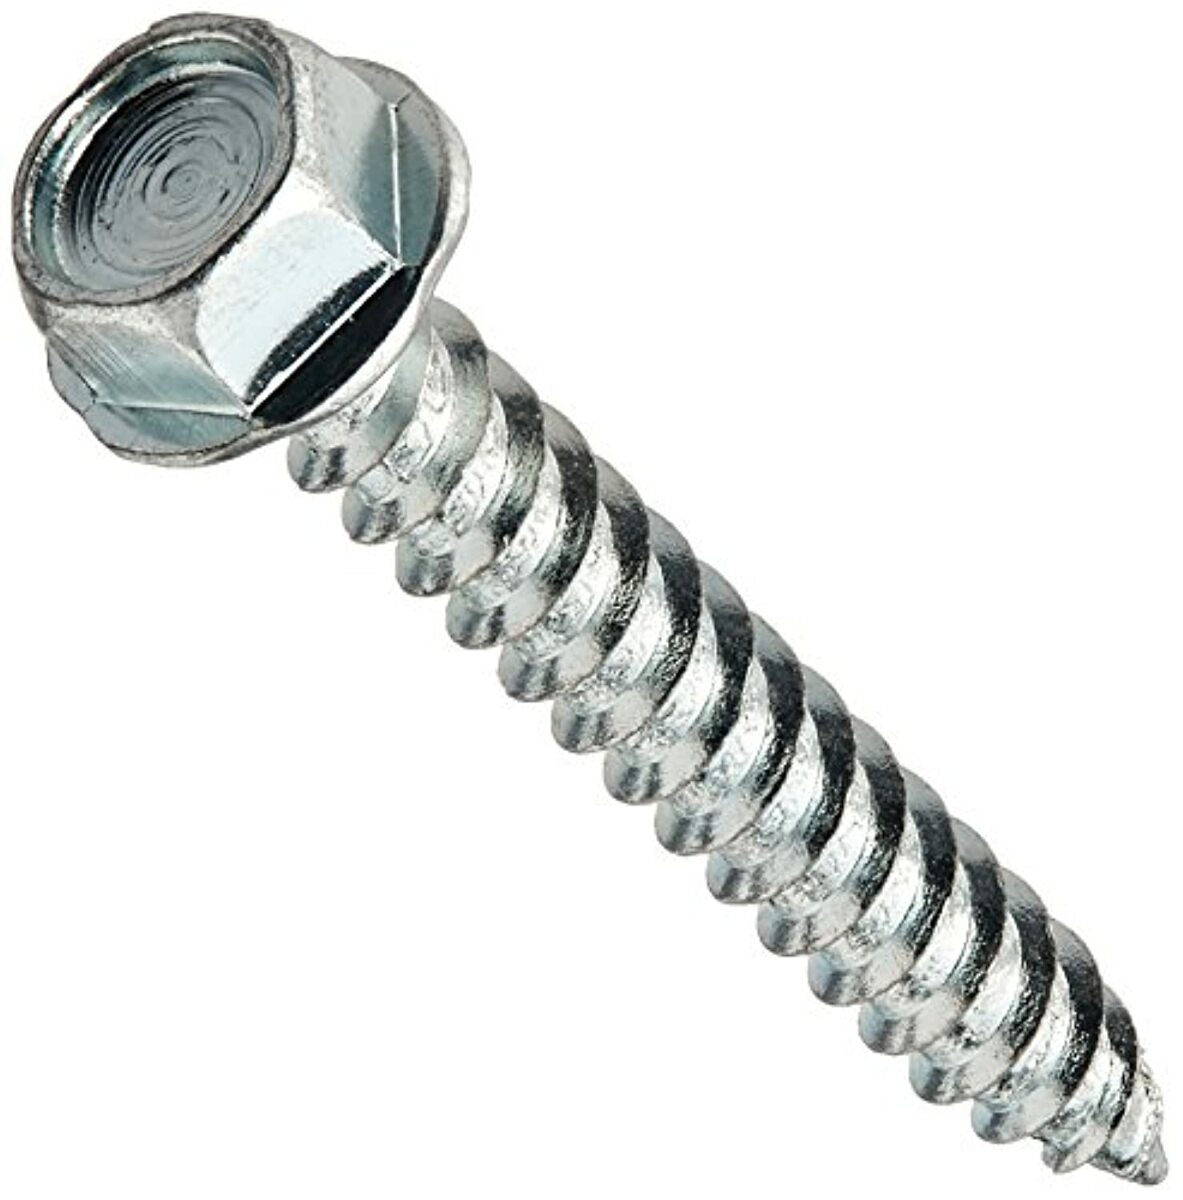 AP Products 012-TR500 8 X 1-1/4 8 x 1-1/4" MH/RV Hex Washer Head Screw 500 Pack - image 3 of 6